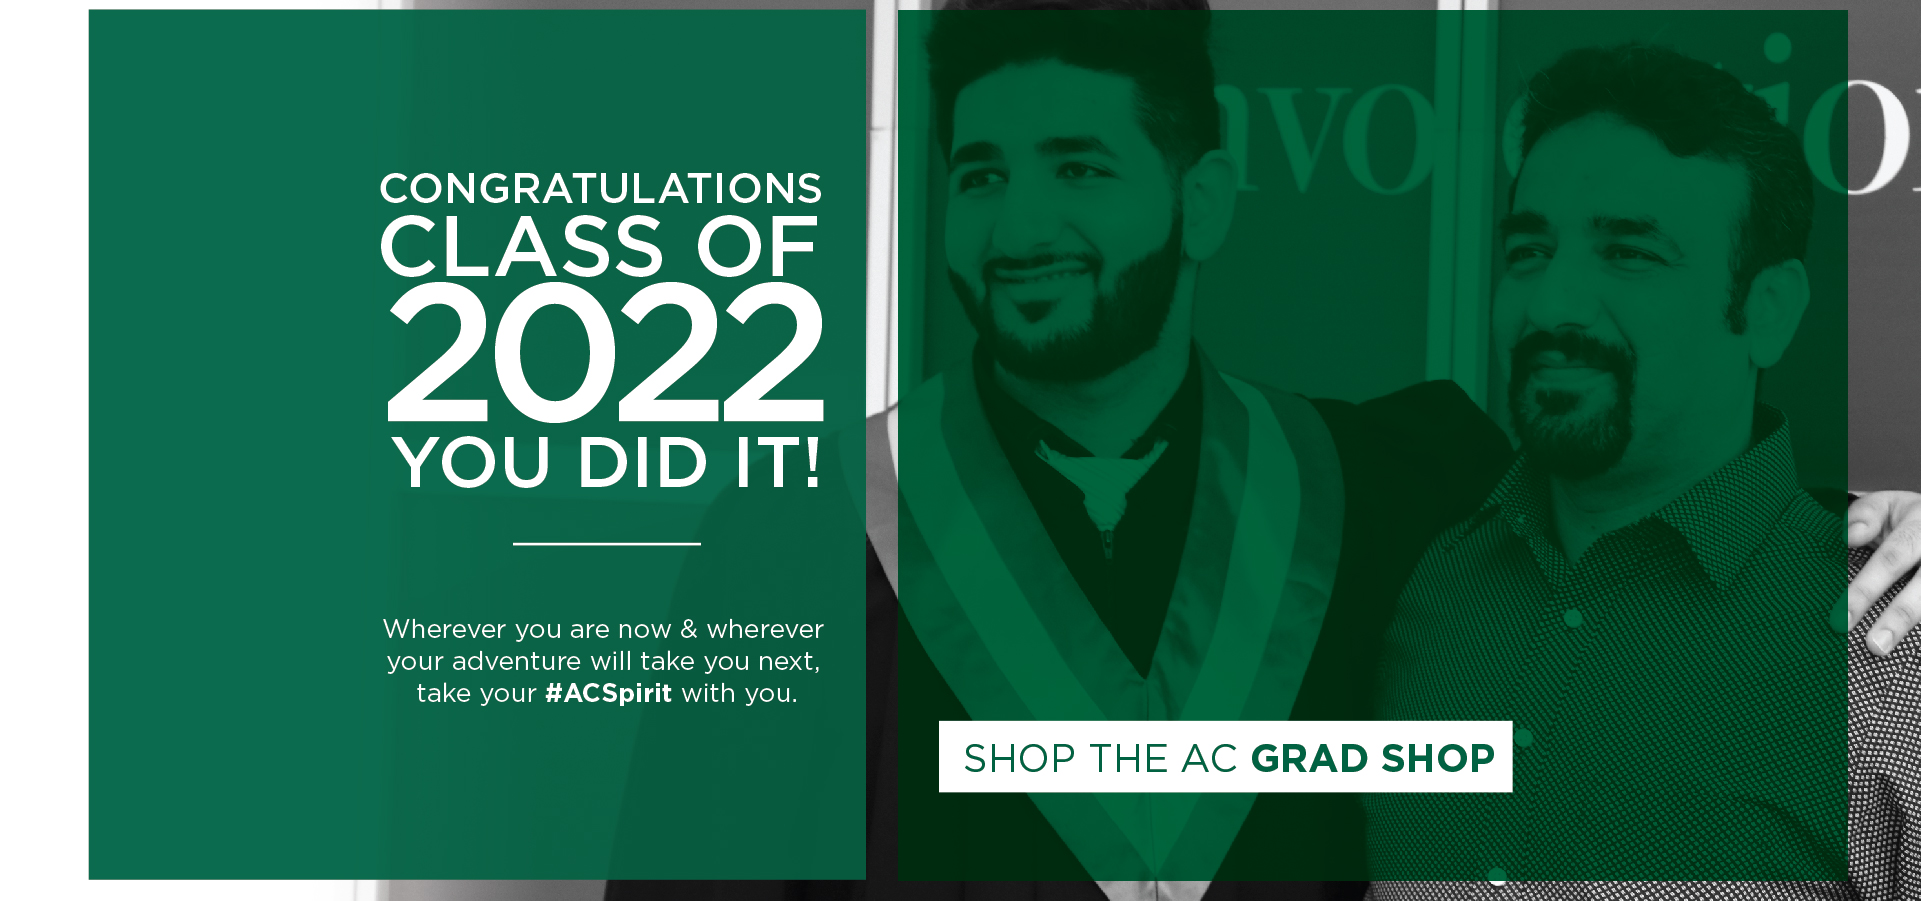 Congratulations Class of 2022. You did it! Wherever you are now & wherever your adventure will take you next, take your #ACSpirit with you. Shop the AC Grad Shop ->